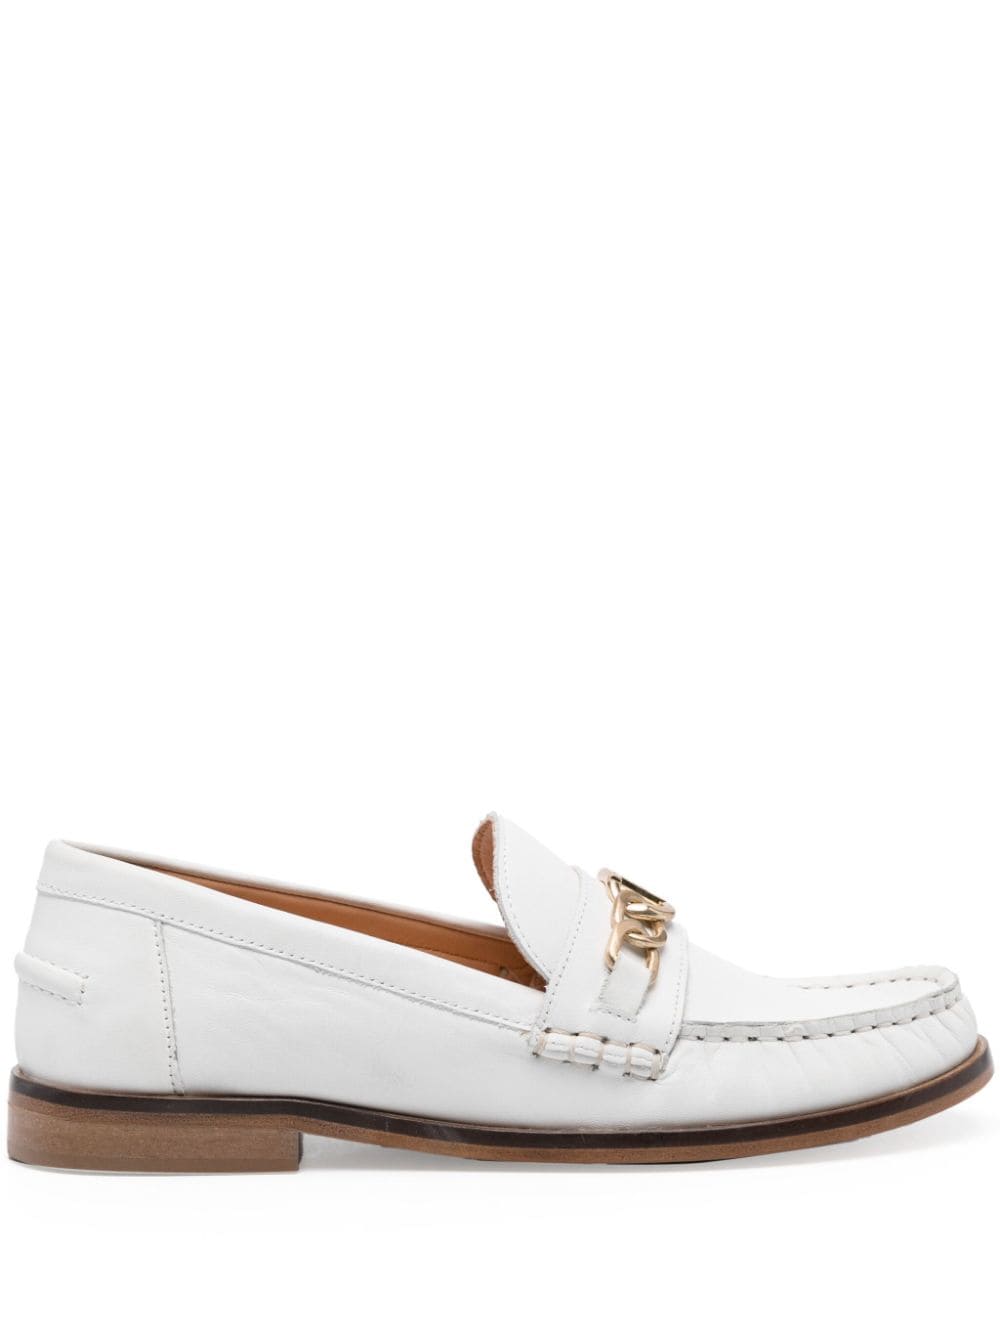 TWINSET chain-detail leather loafers - White von TWINSET